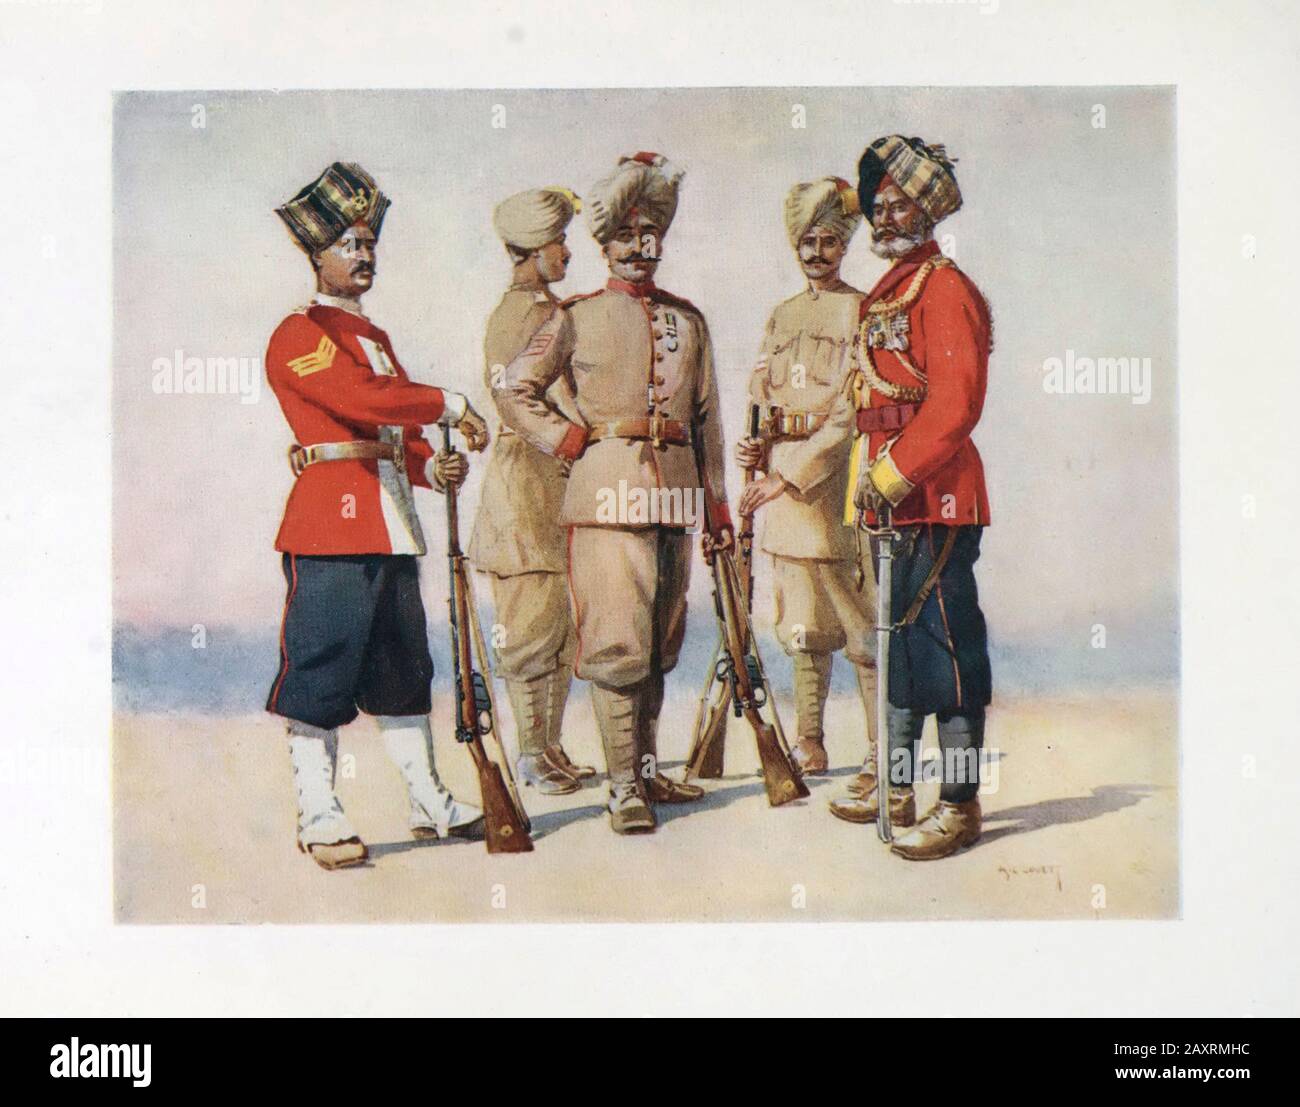 Armies of India. By major A.C. Lovett. London. 1911. Dogras 31st Punjabis. 37th Dogras. 27th Punjabis (front) 41st Dogras (back) 38th Dogras (Subadar- Stock Photo